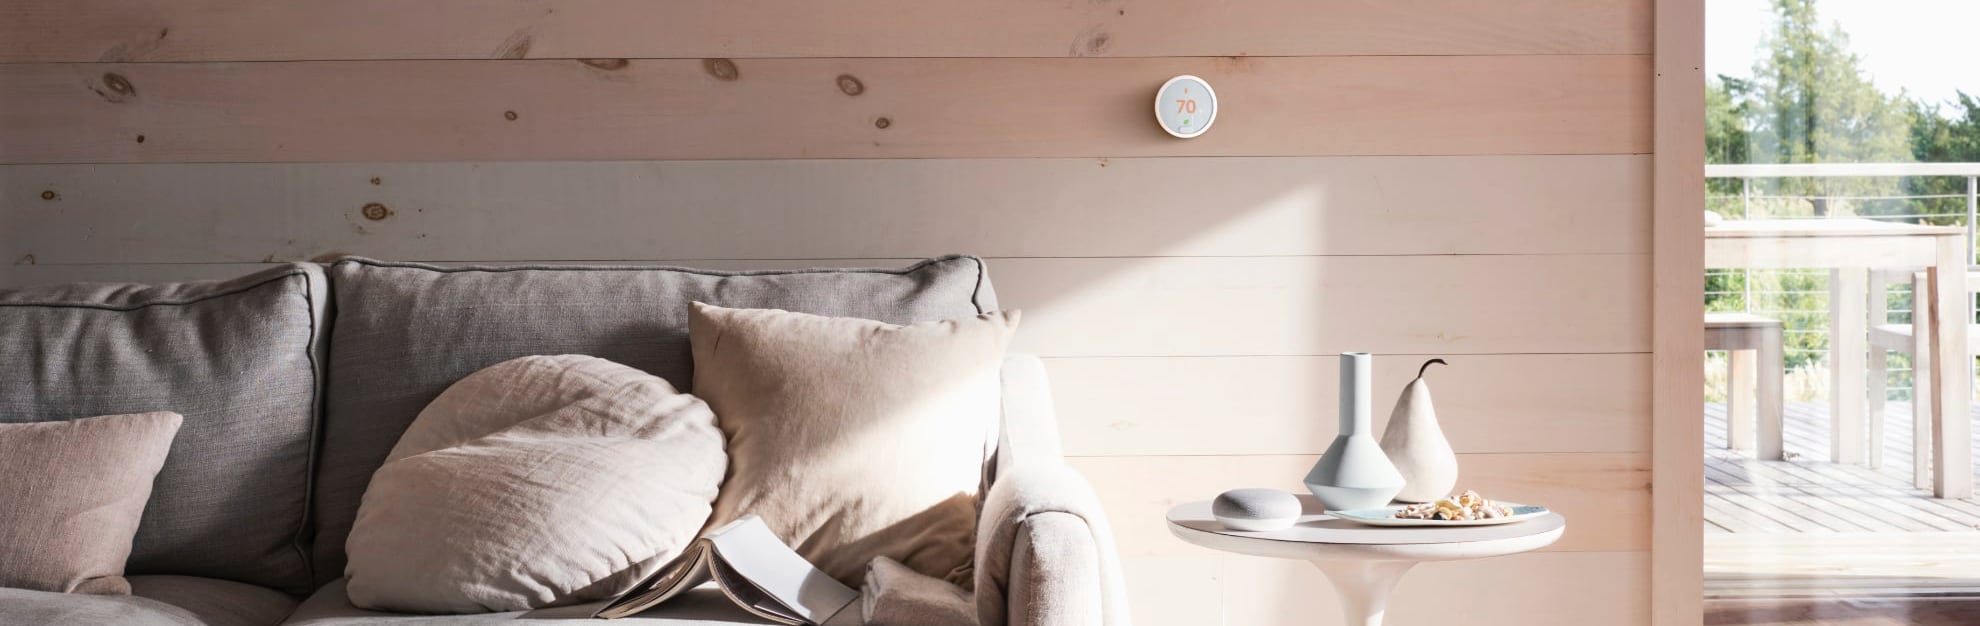 Vivint Home Automation in Worcester